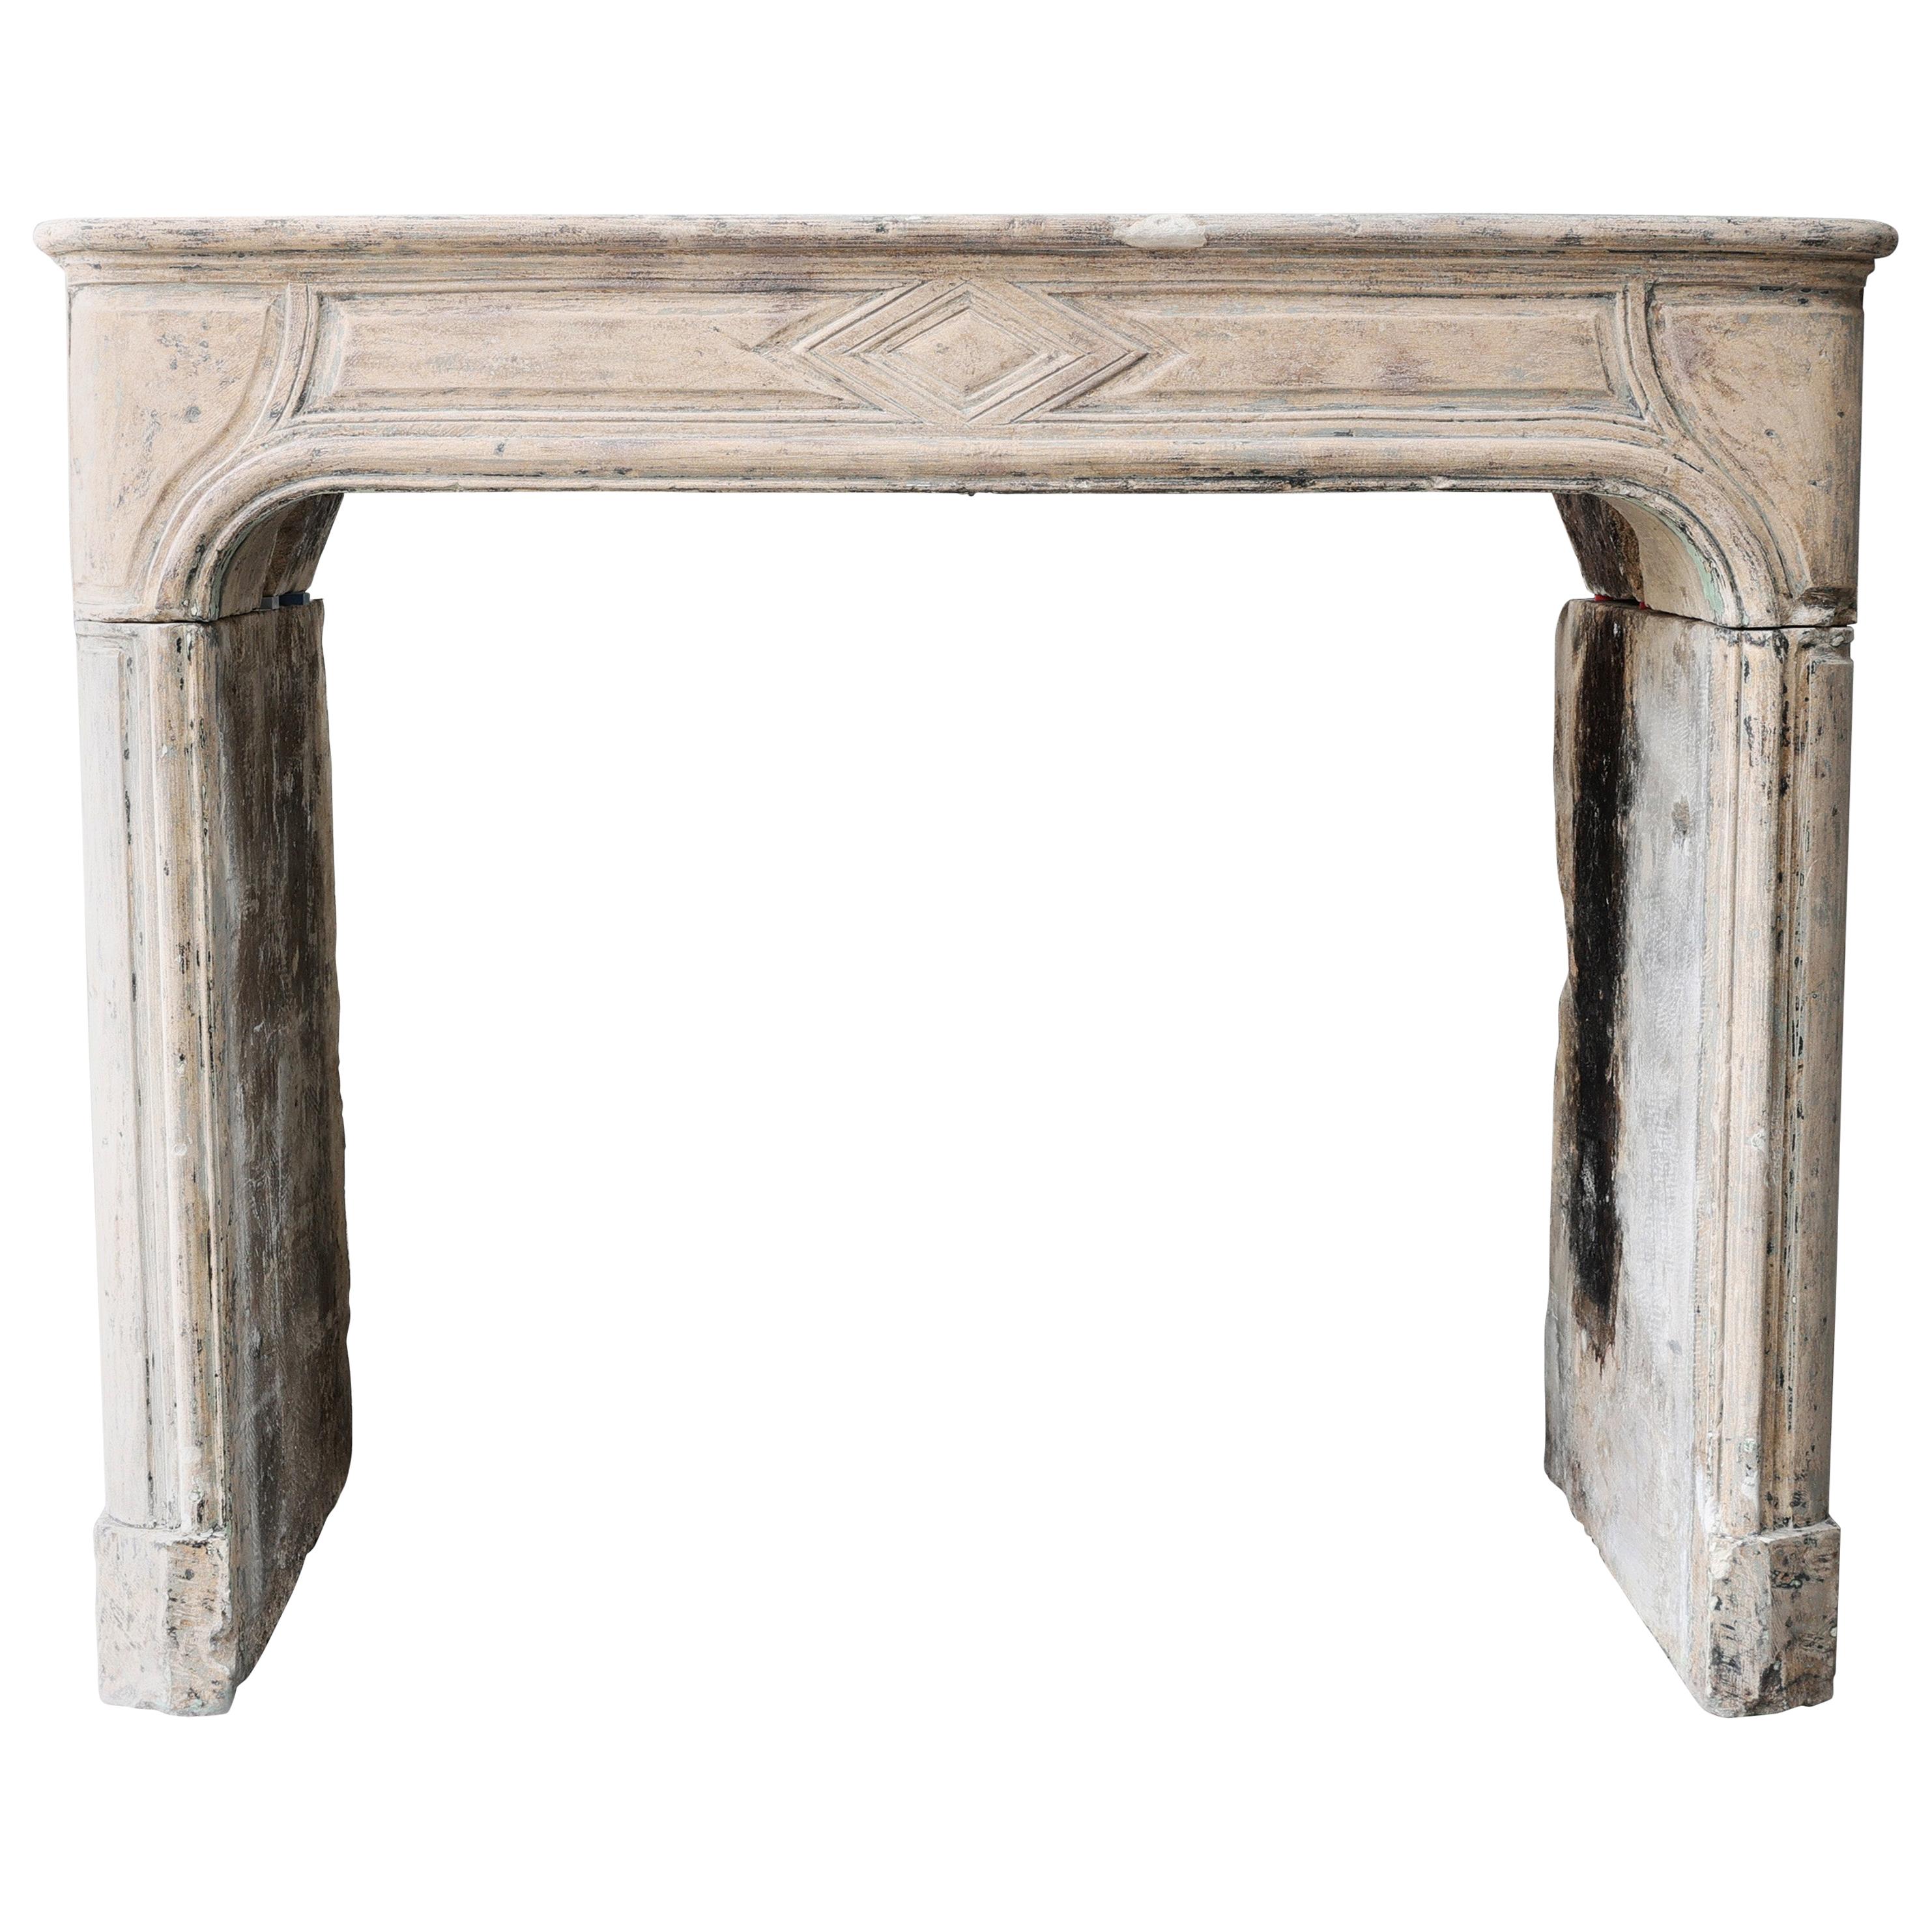 Antique Fireplace of French Limestone in Style of Louis XIV, 19th Century